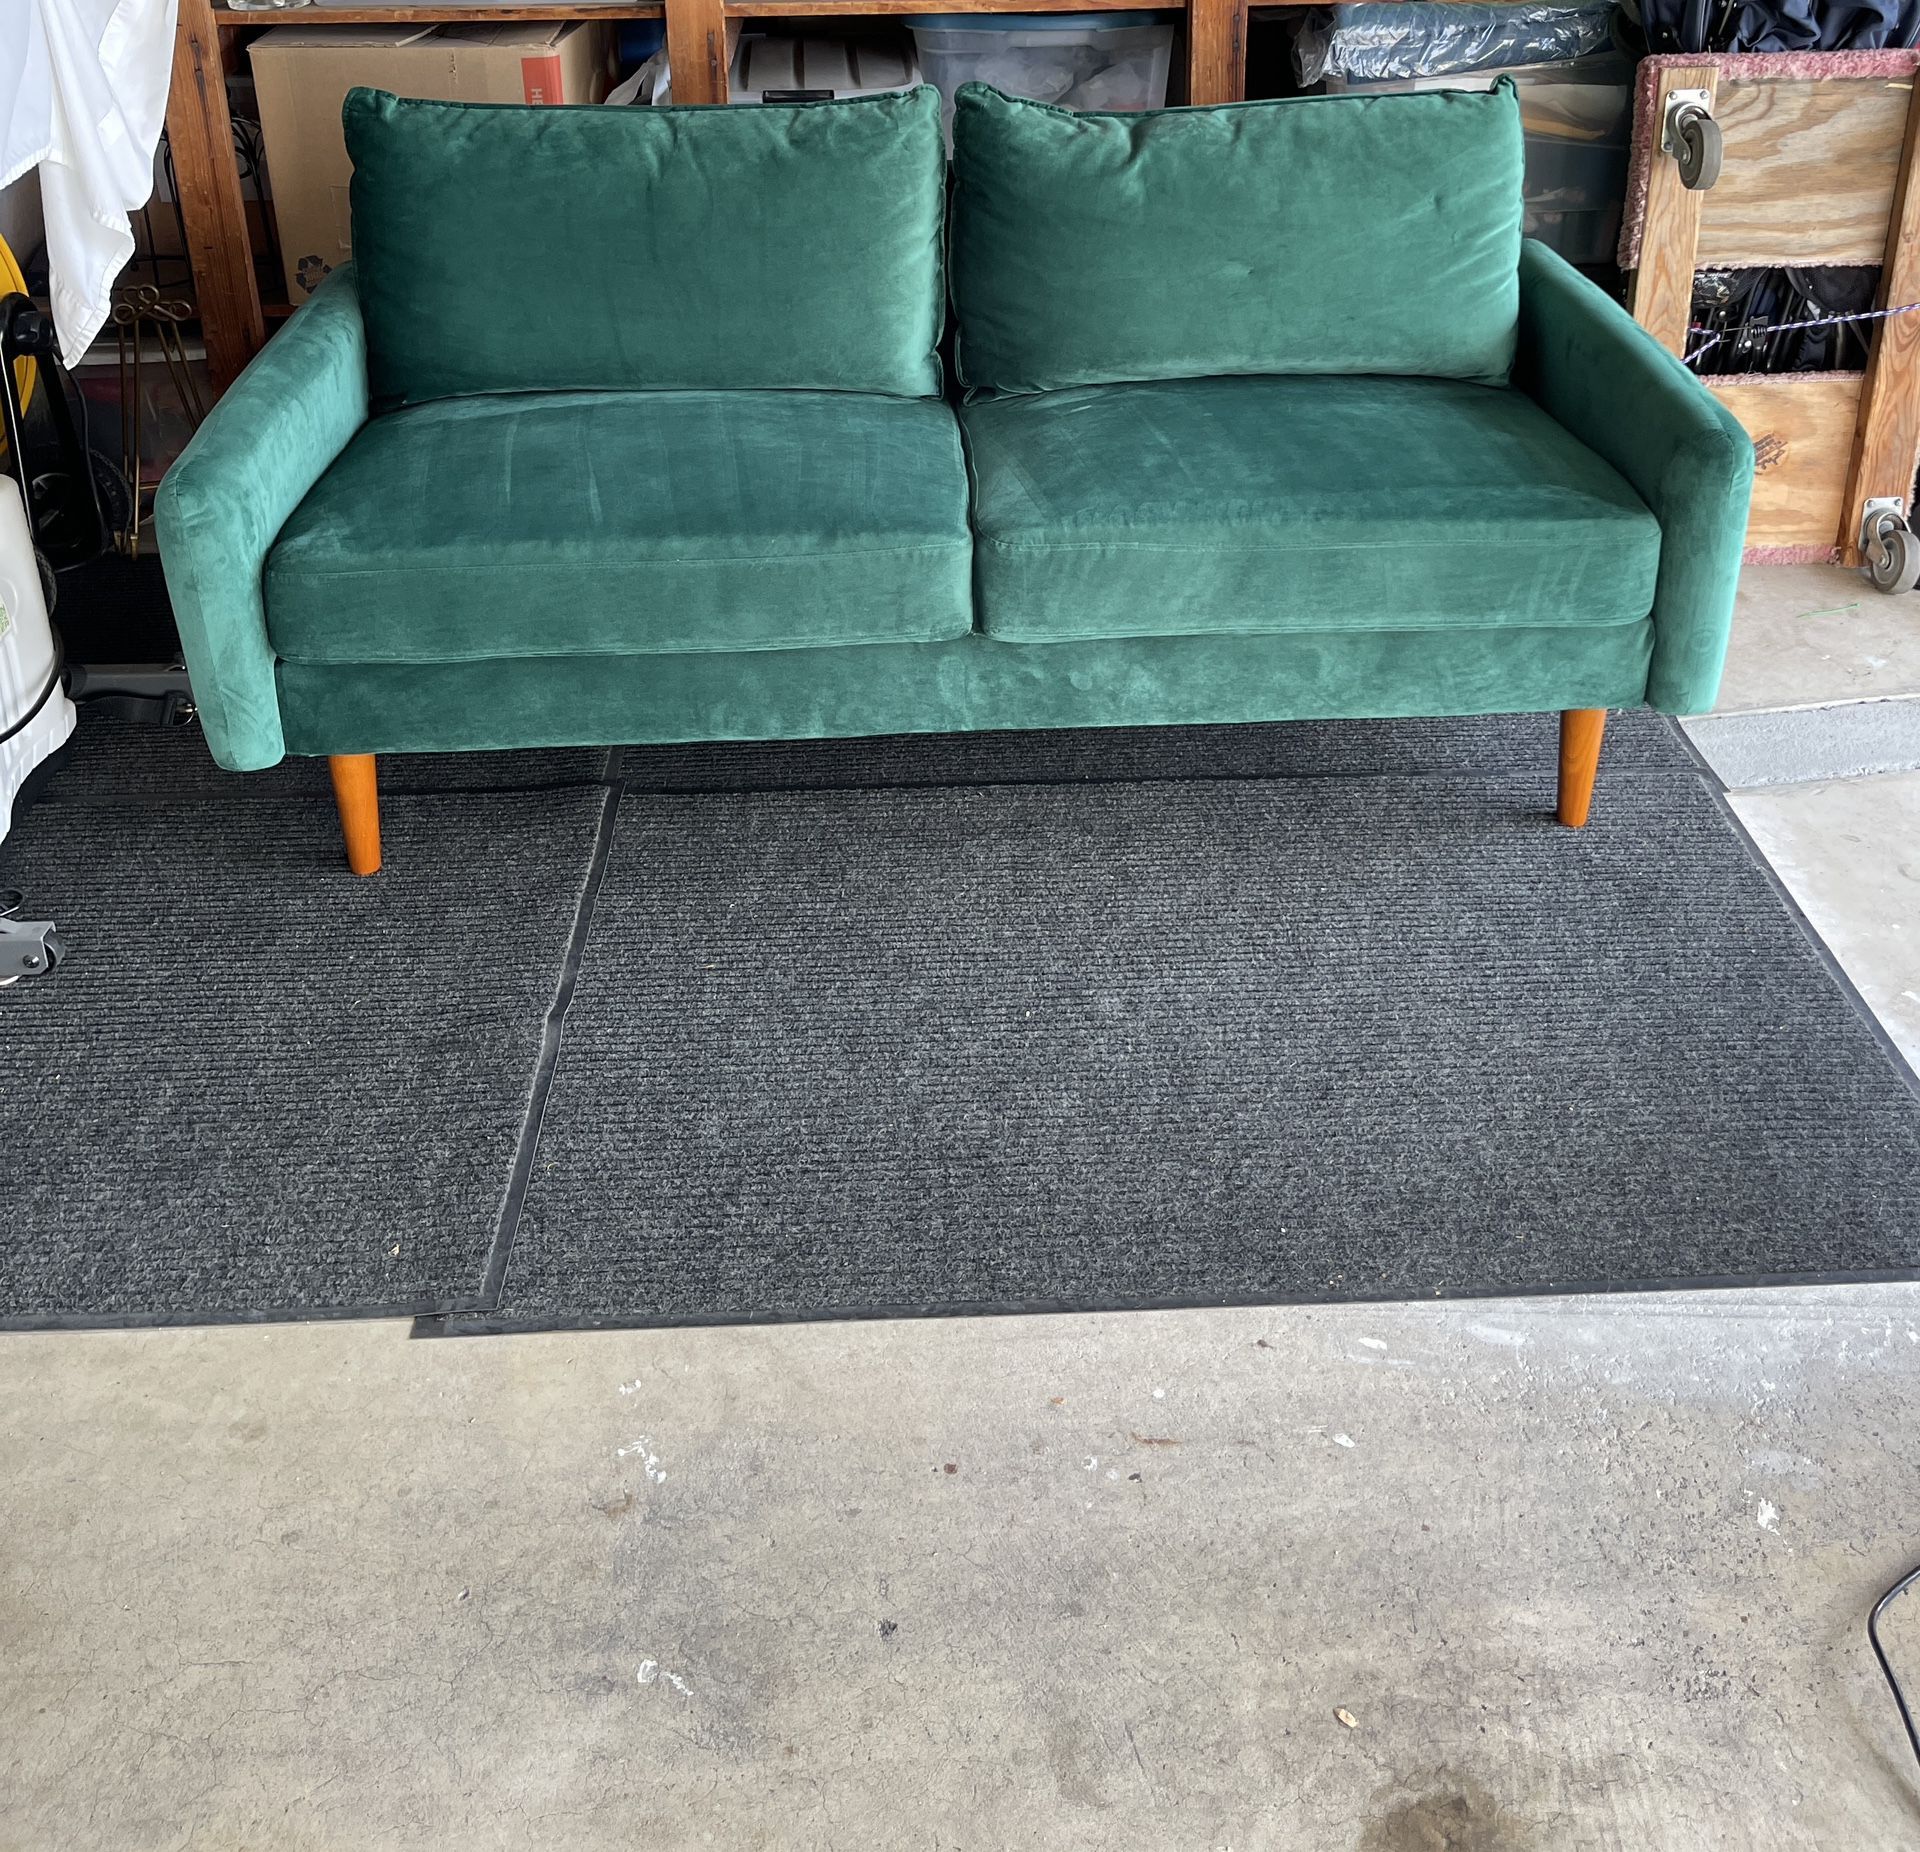 Vintage Retro Style Feamer Velvet Loveseat Couch for Small Apartment and Living Room,Golden Metal Legs Round Arms 33" H x 57.8" W x 31.7" D Green 58"